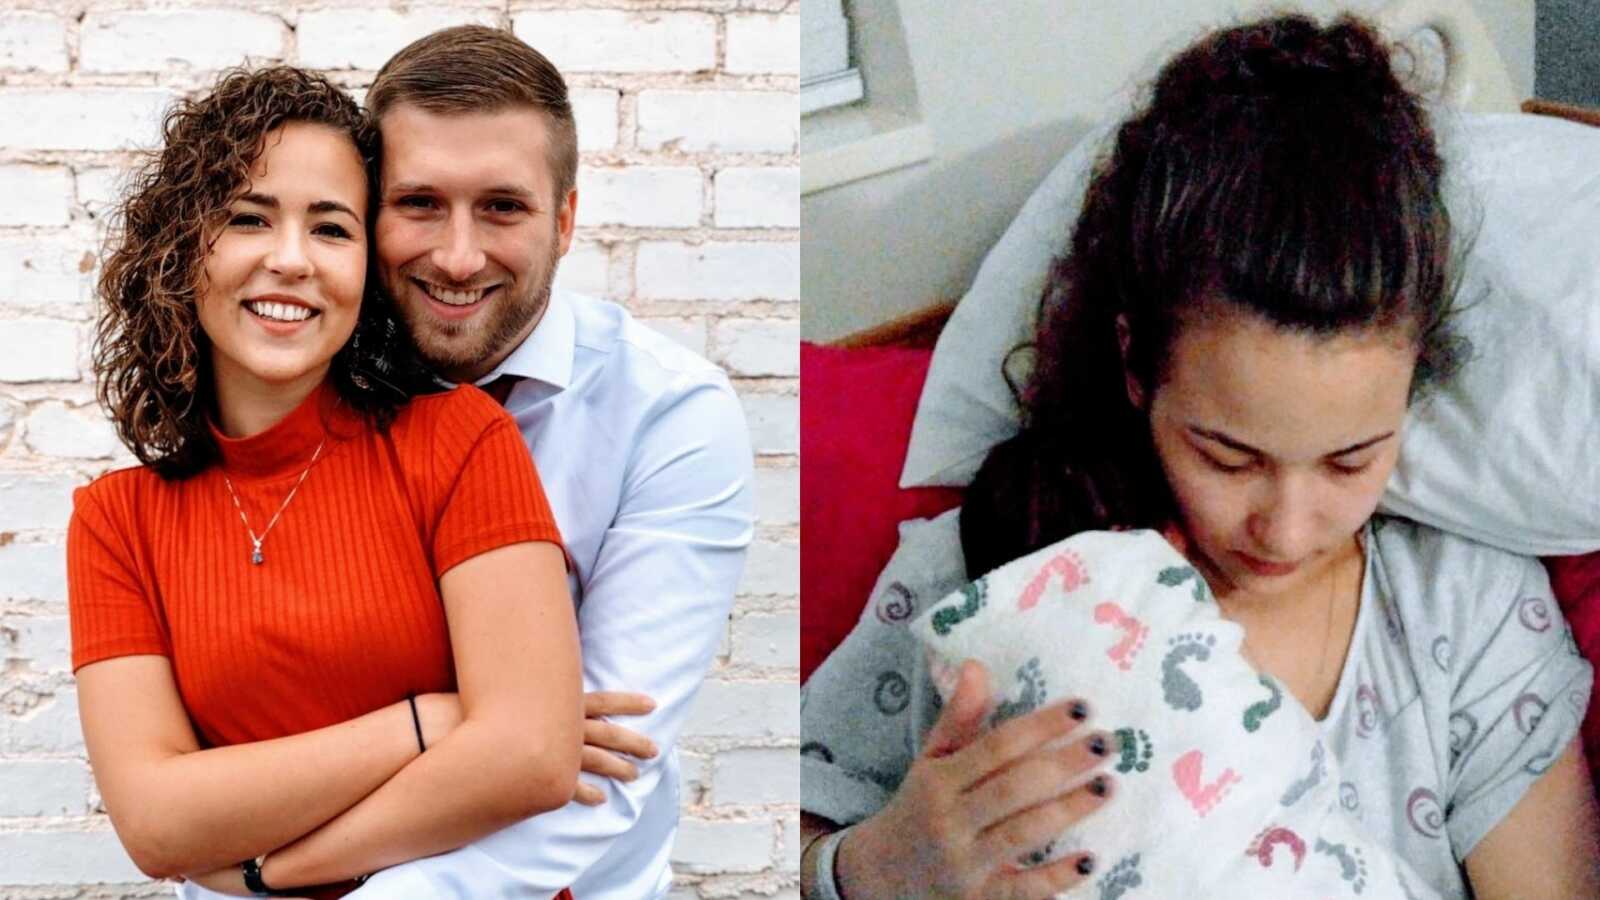 On the left, man and woman embrace lovingly, on the right, teen mom holds her newborn before placing the baby with it's adoptive parents